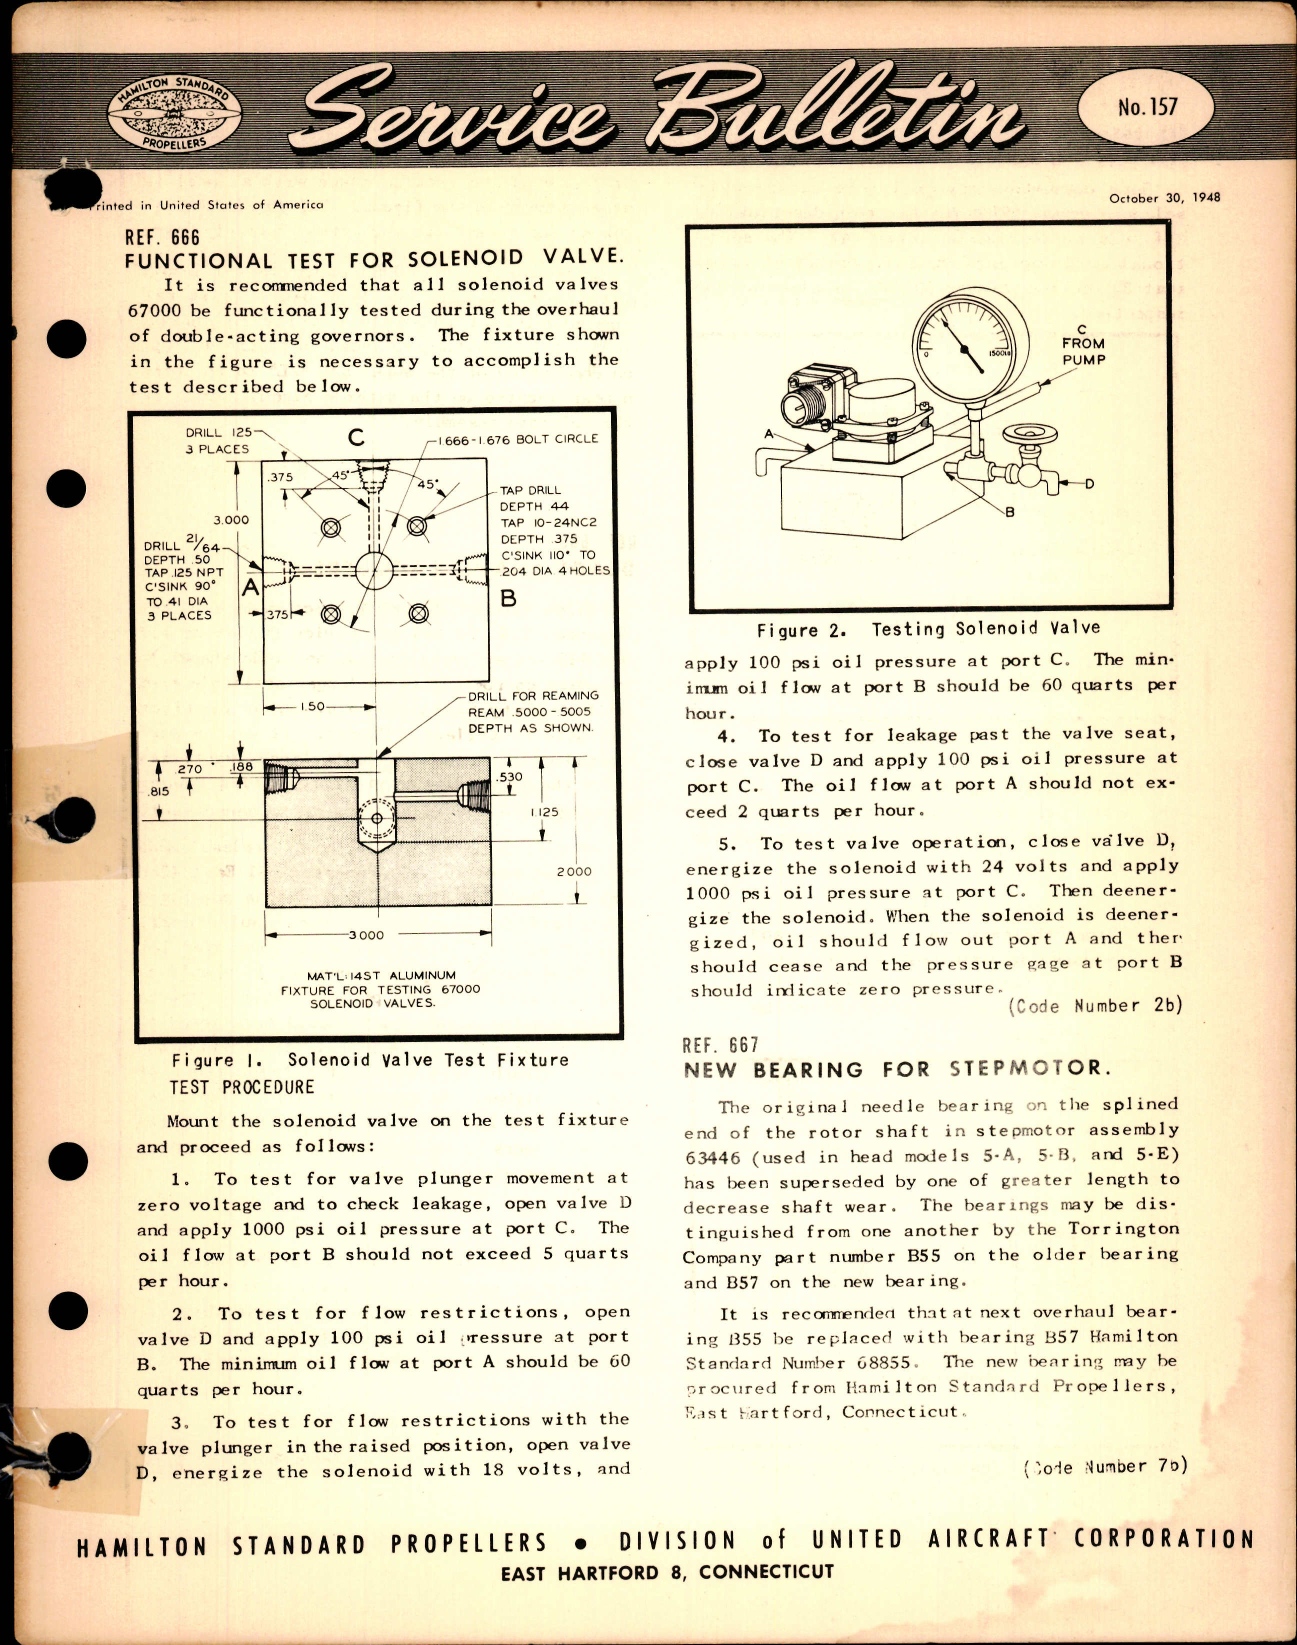 Sample page 1 from AirCorps Library document: Functional Test for Solenoid Valve, Ref 666